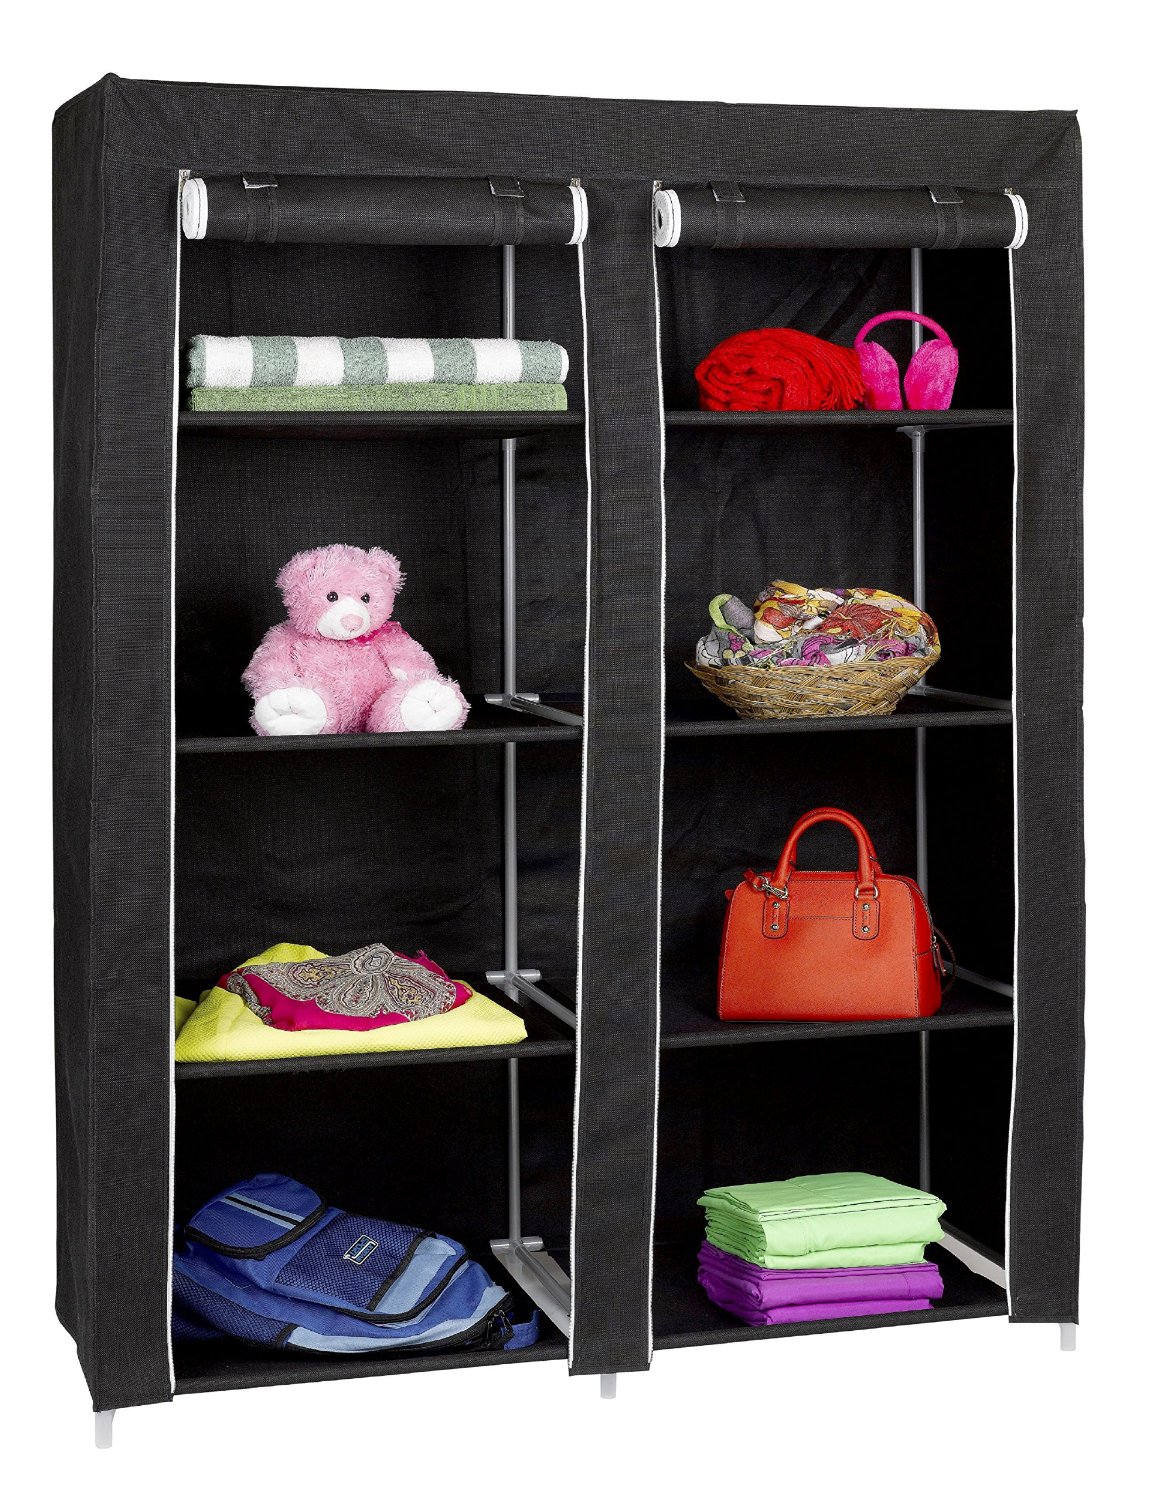 15 Fantastic Items for Organizing Your Home | www.growingupgabel.com